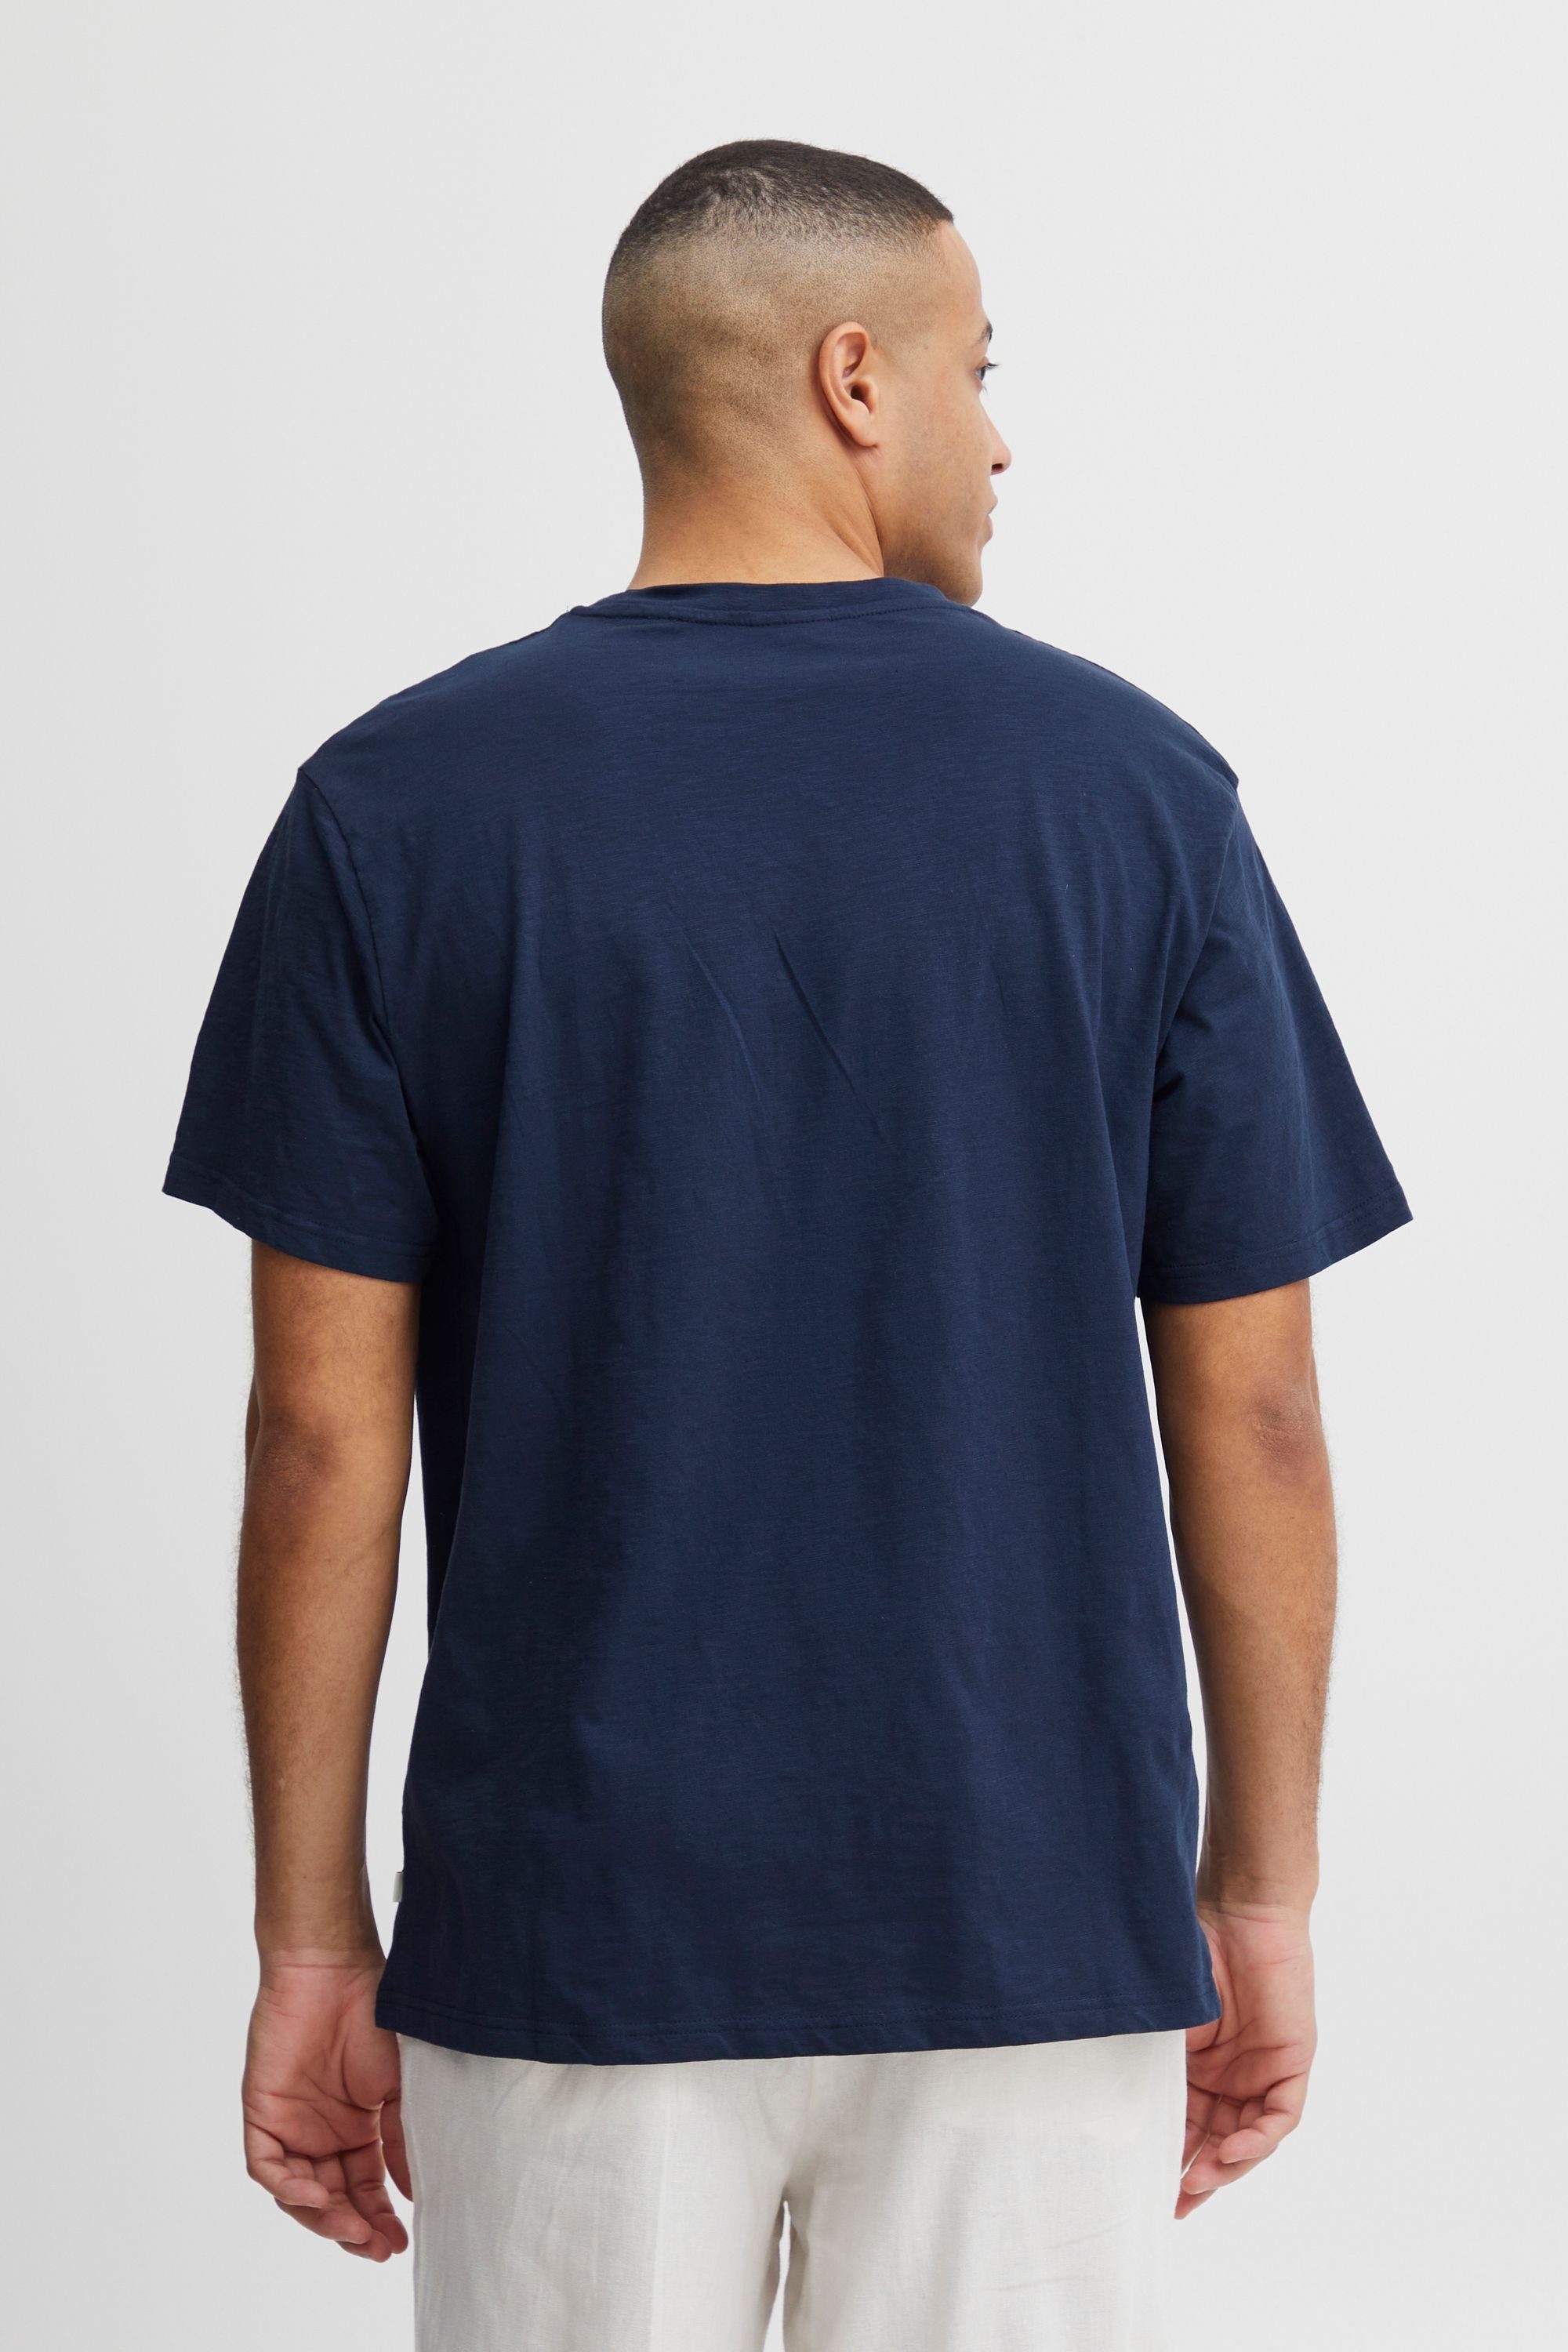 !Solid INSIGNIA 21107749 T-Shirt SDFinlee BLUE - (194010)